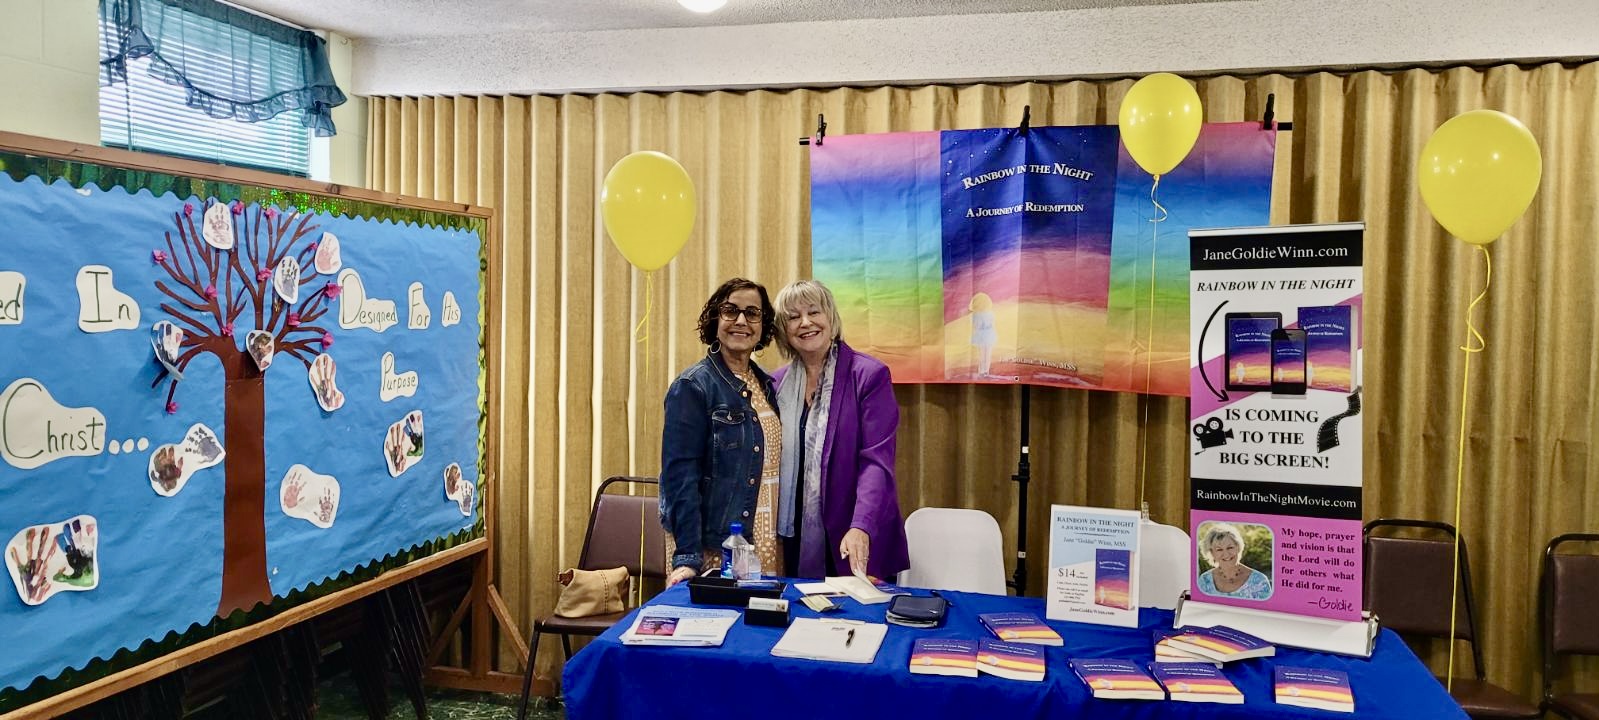 Rainbow in the Night Movie Screening, life story of Jane Goldie Winn, Shalom Assembly of God, Willow Grove PA